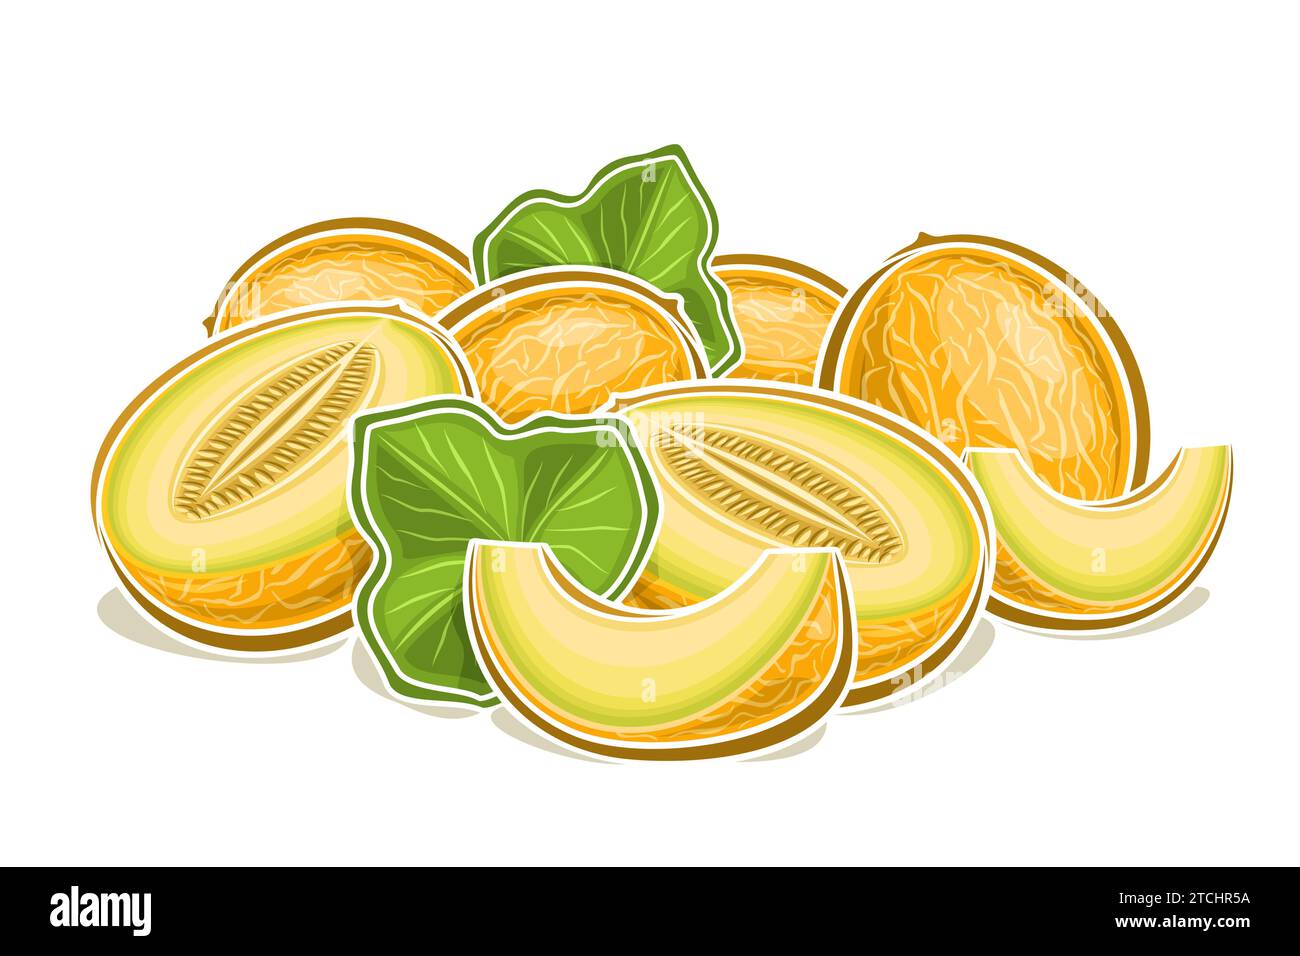 Vector logo for Melon, decorative horizontal poster with illustration of ripe melon composition with green leaves, cartoon design fruity print with ch Stock Vector